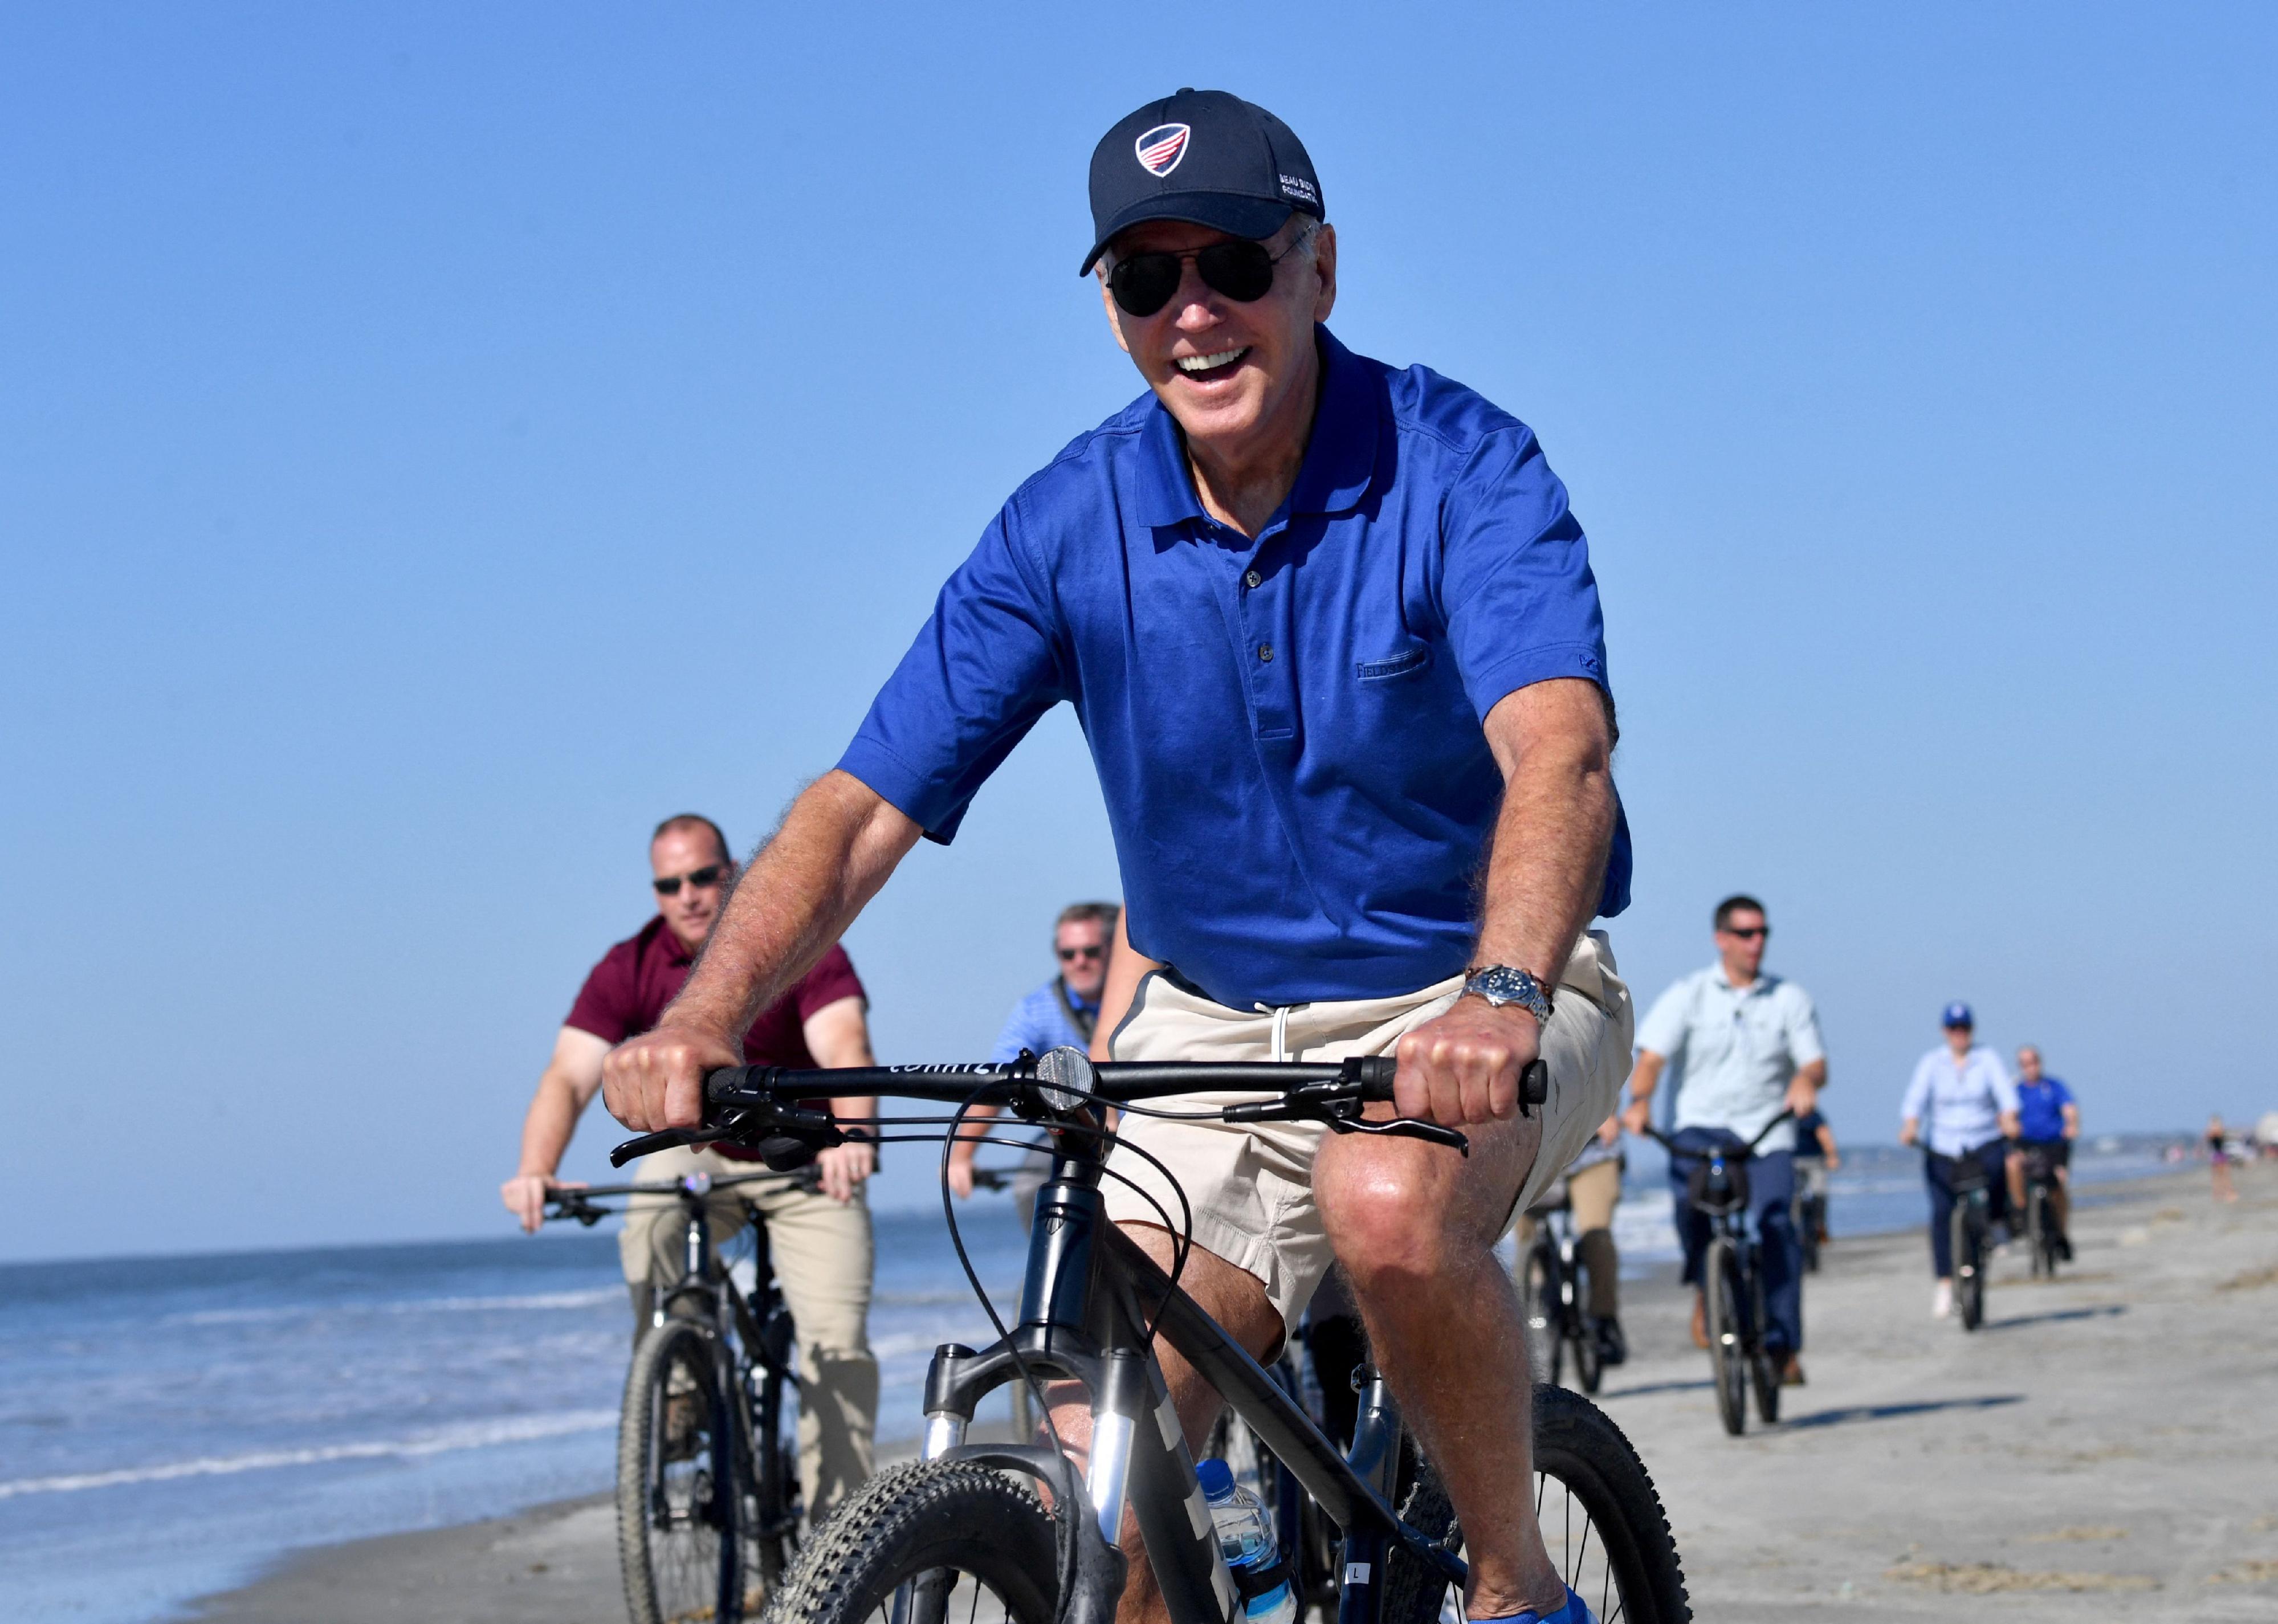 President Biden riding a bicycle on the beach in South Carolina.